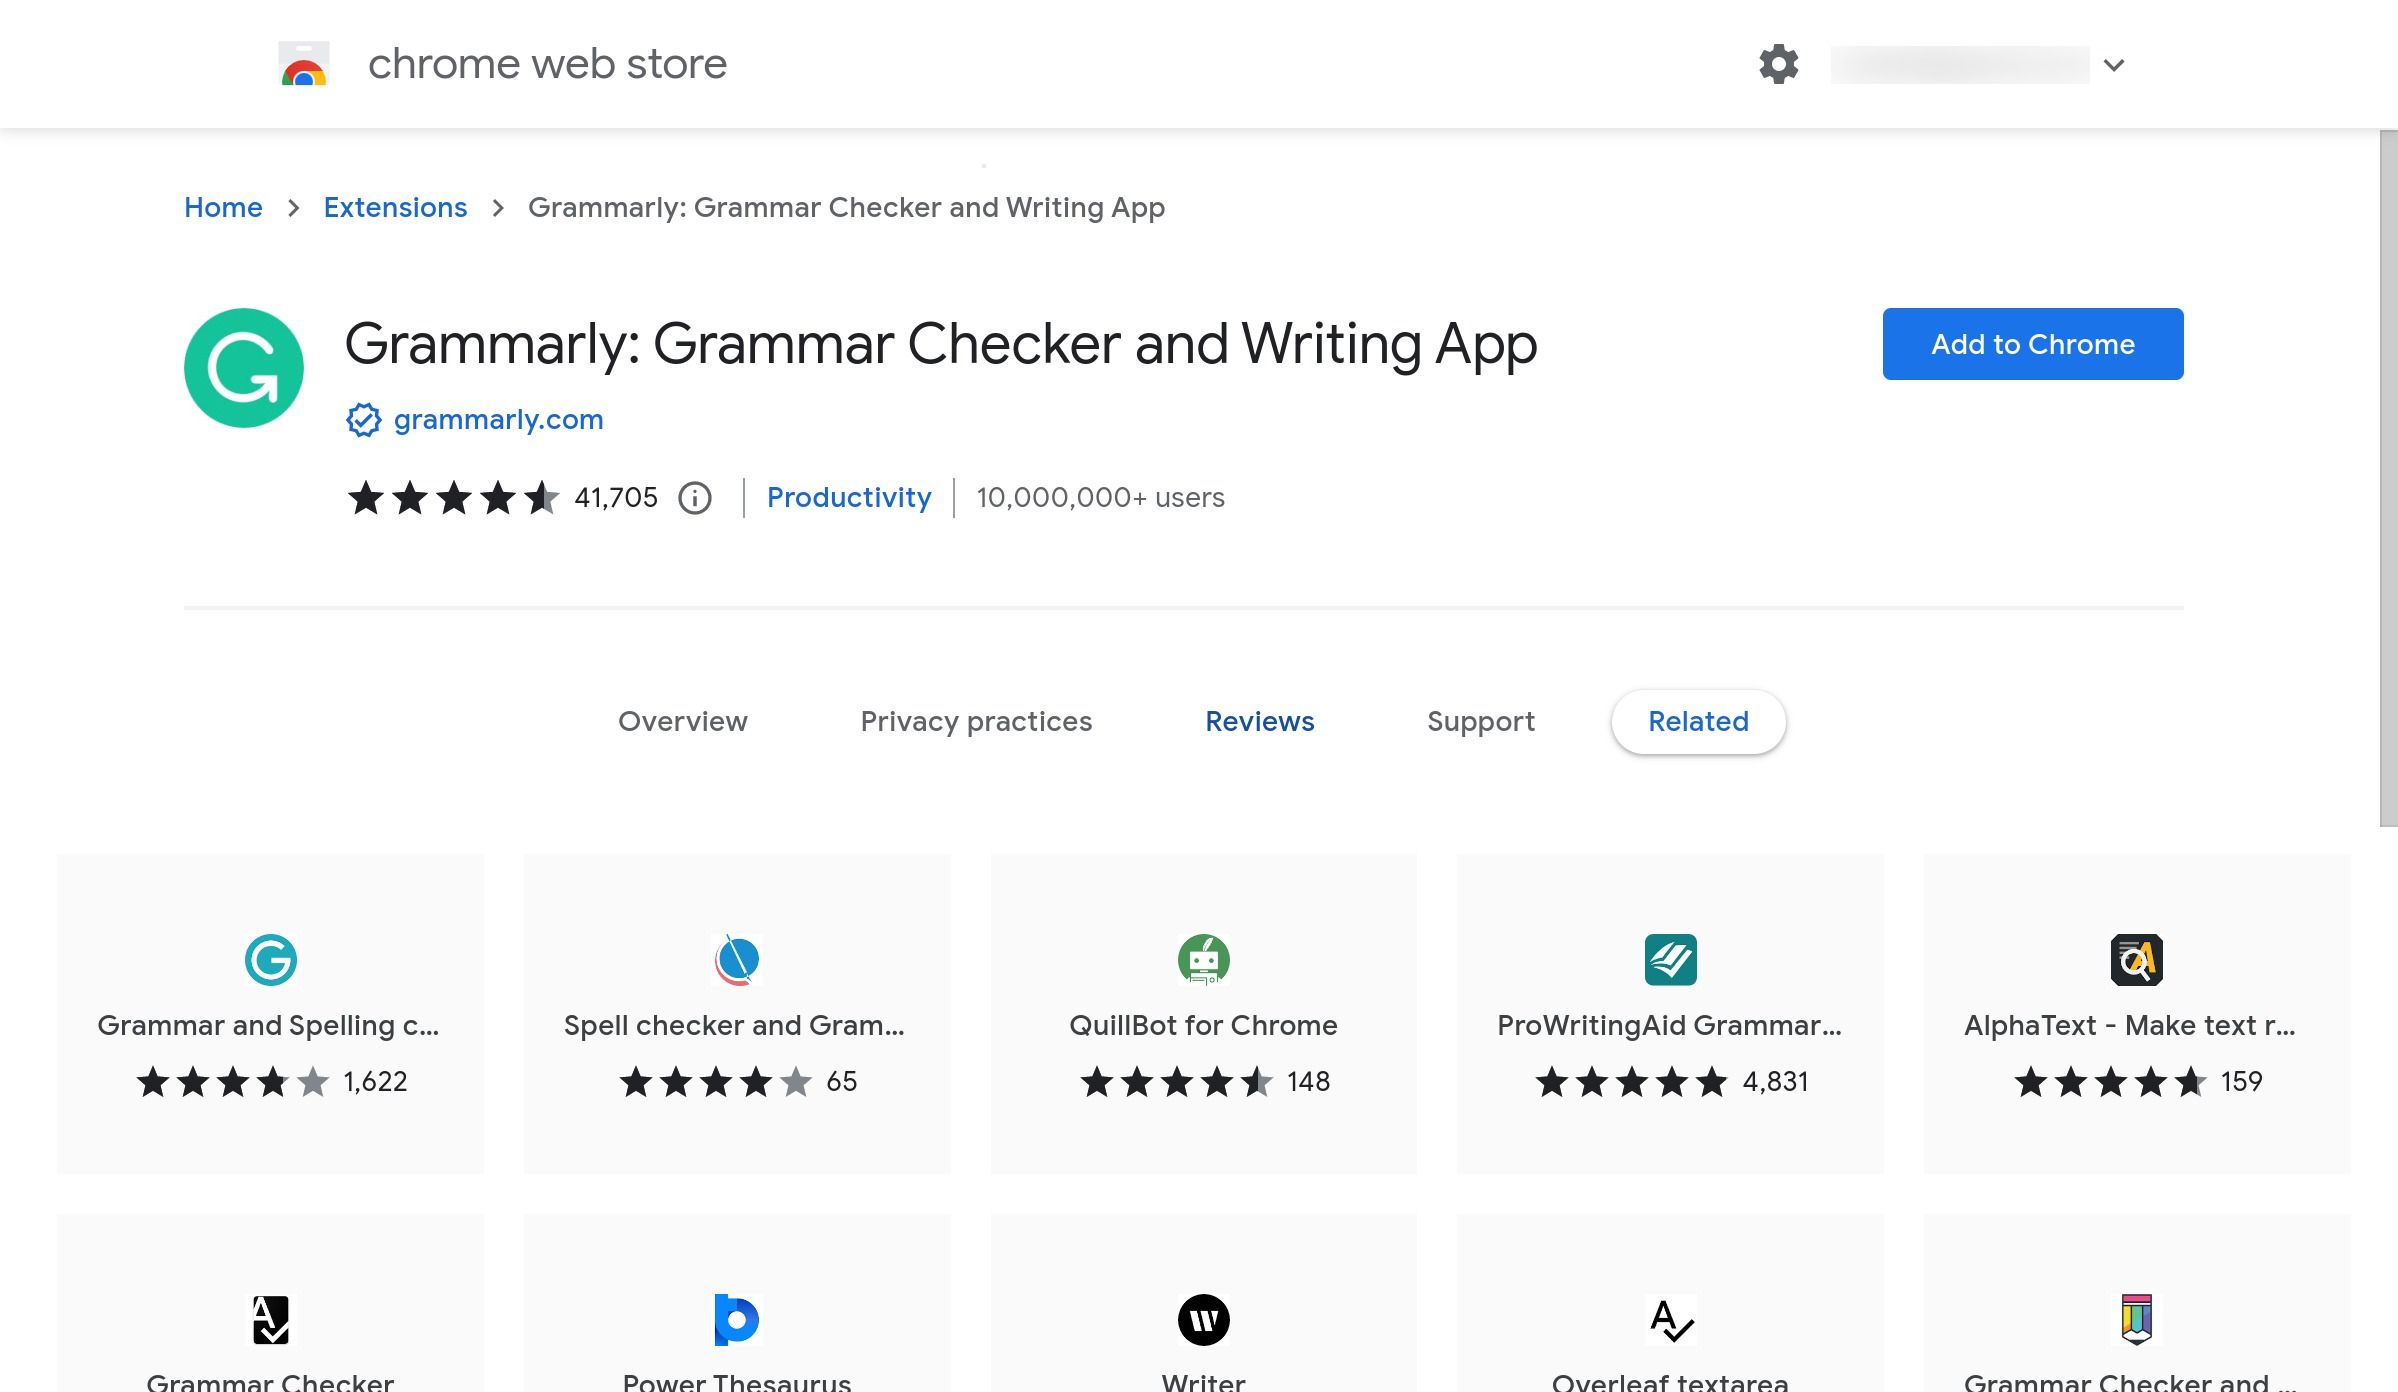 The Grammarly page in the Chrome Web Store